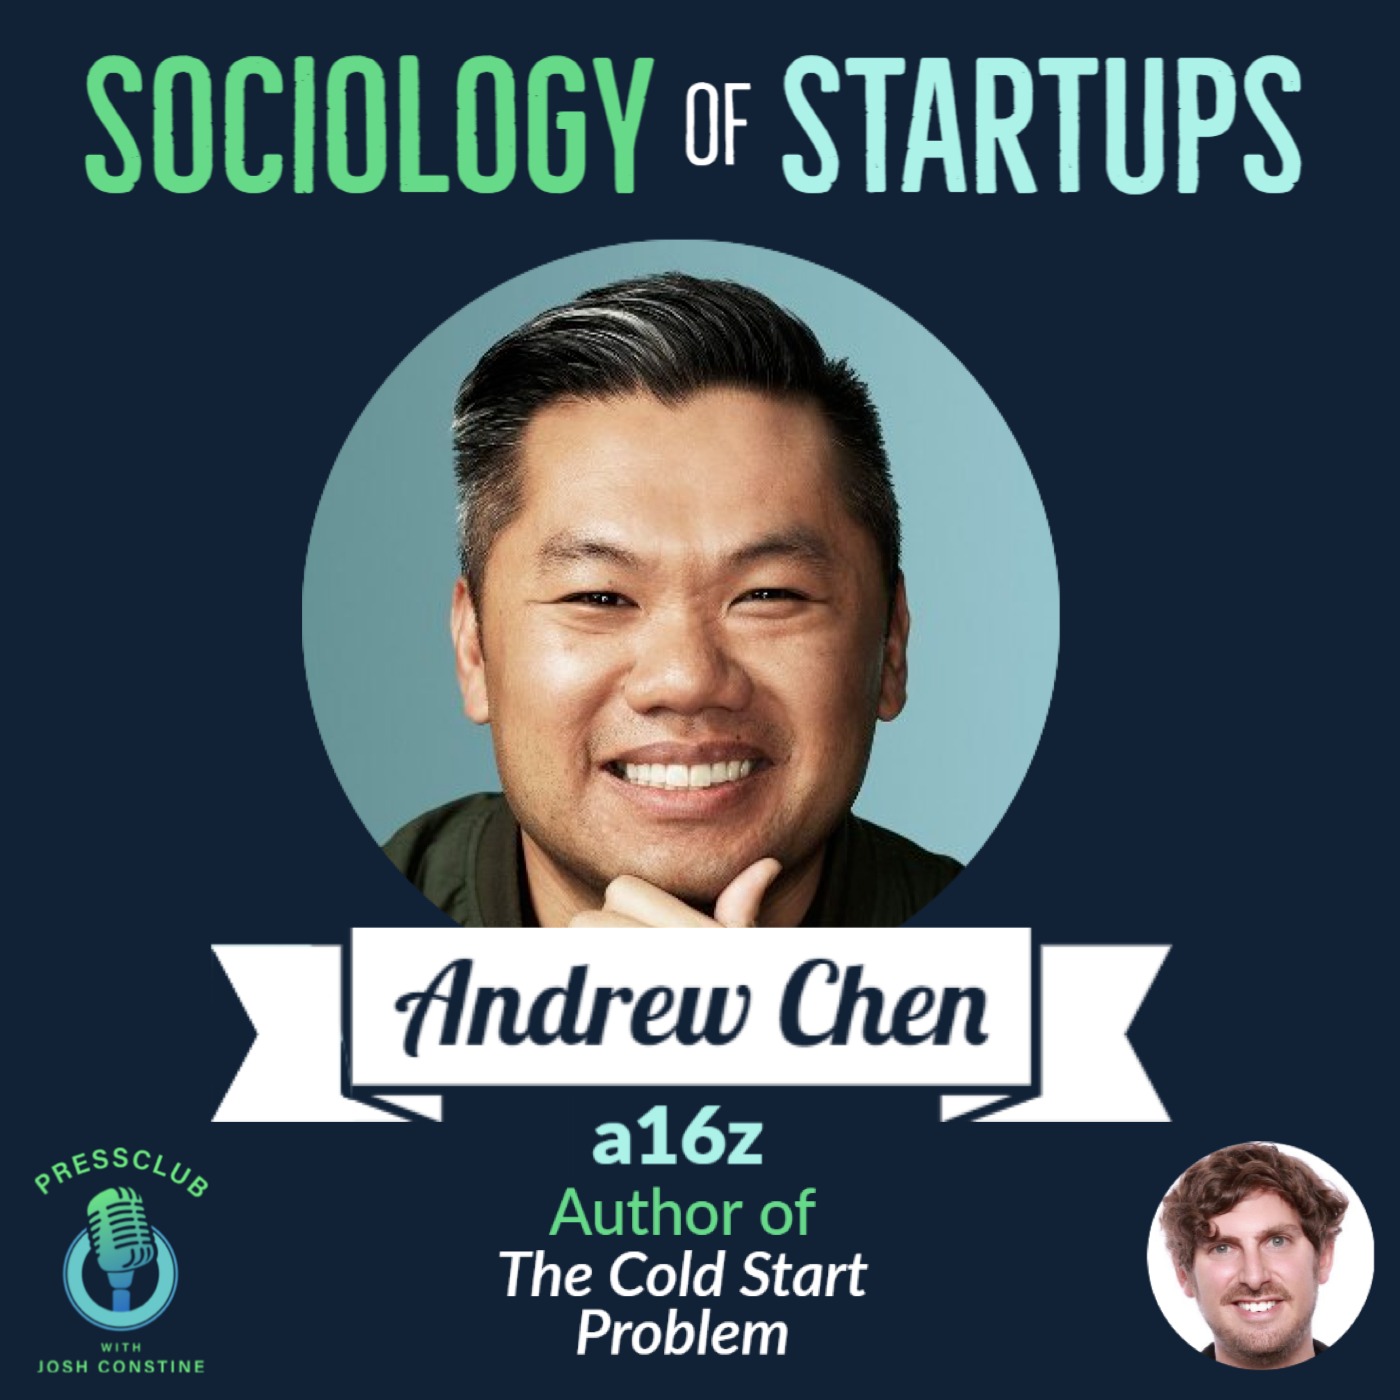 How to harness network effects: Andrew Chen on the sociology of startups